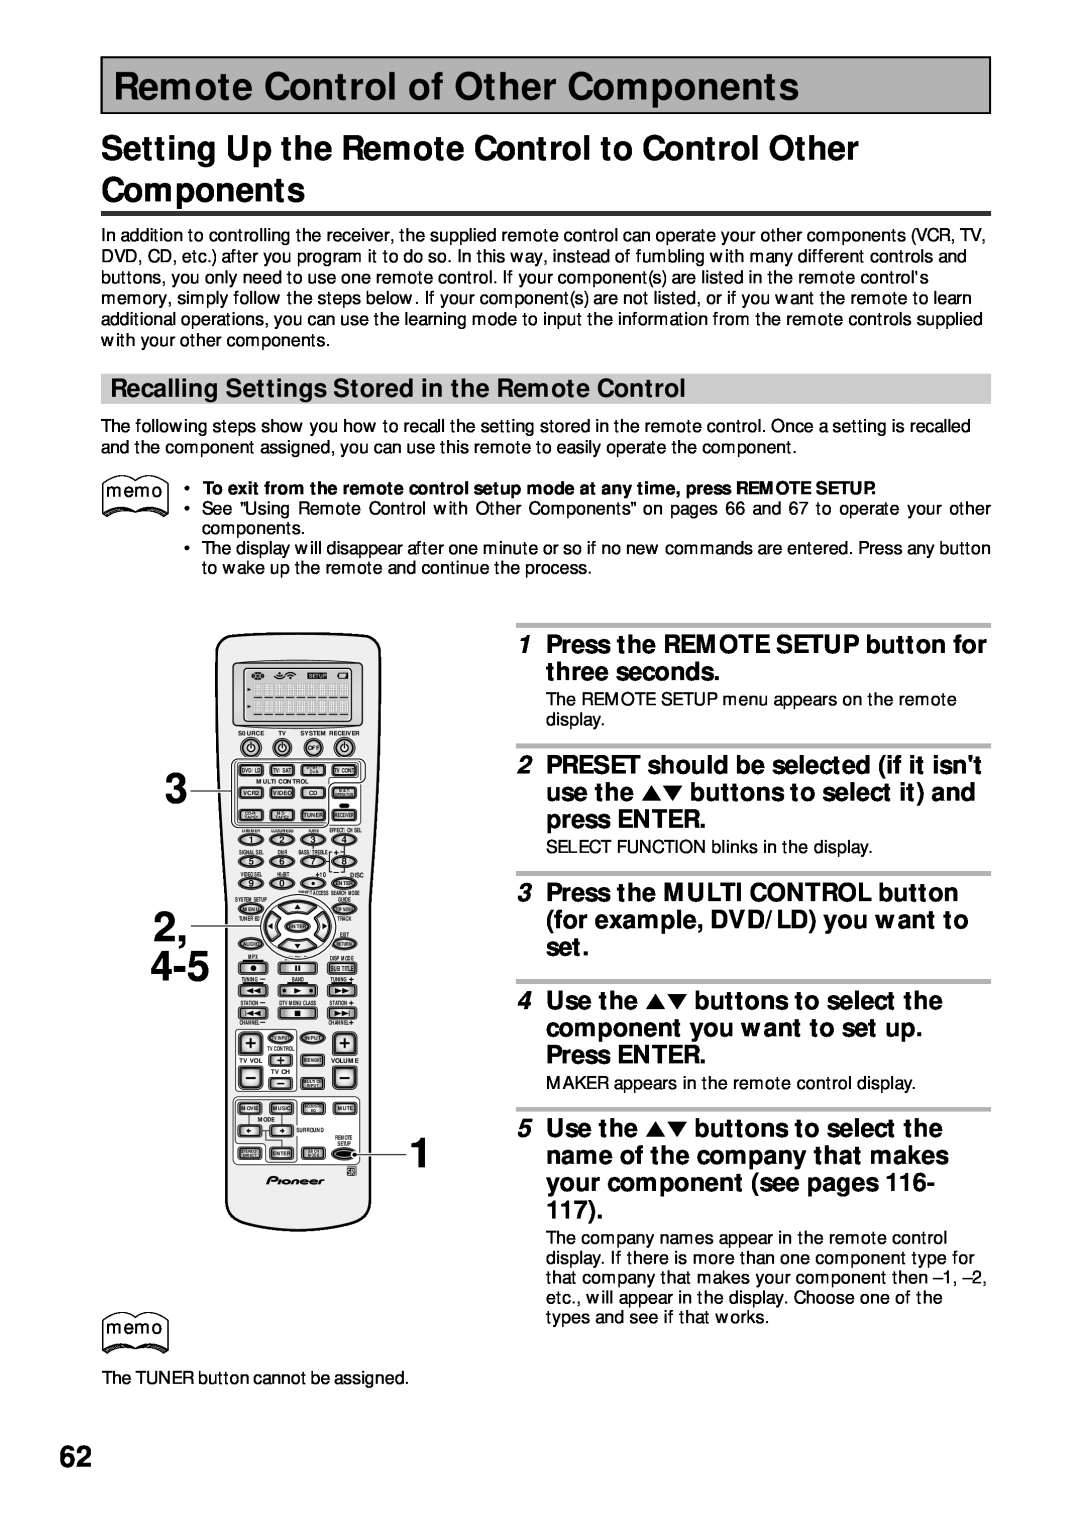 Pioneer VSX-45TX manual Remote Control of Other Components, Recalling Settings Stored in the Remote Control 